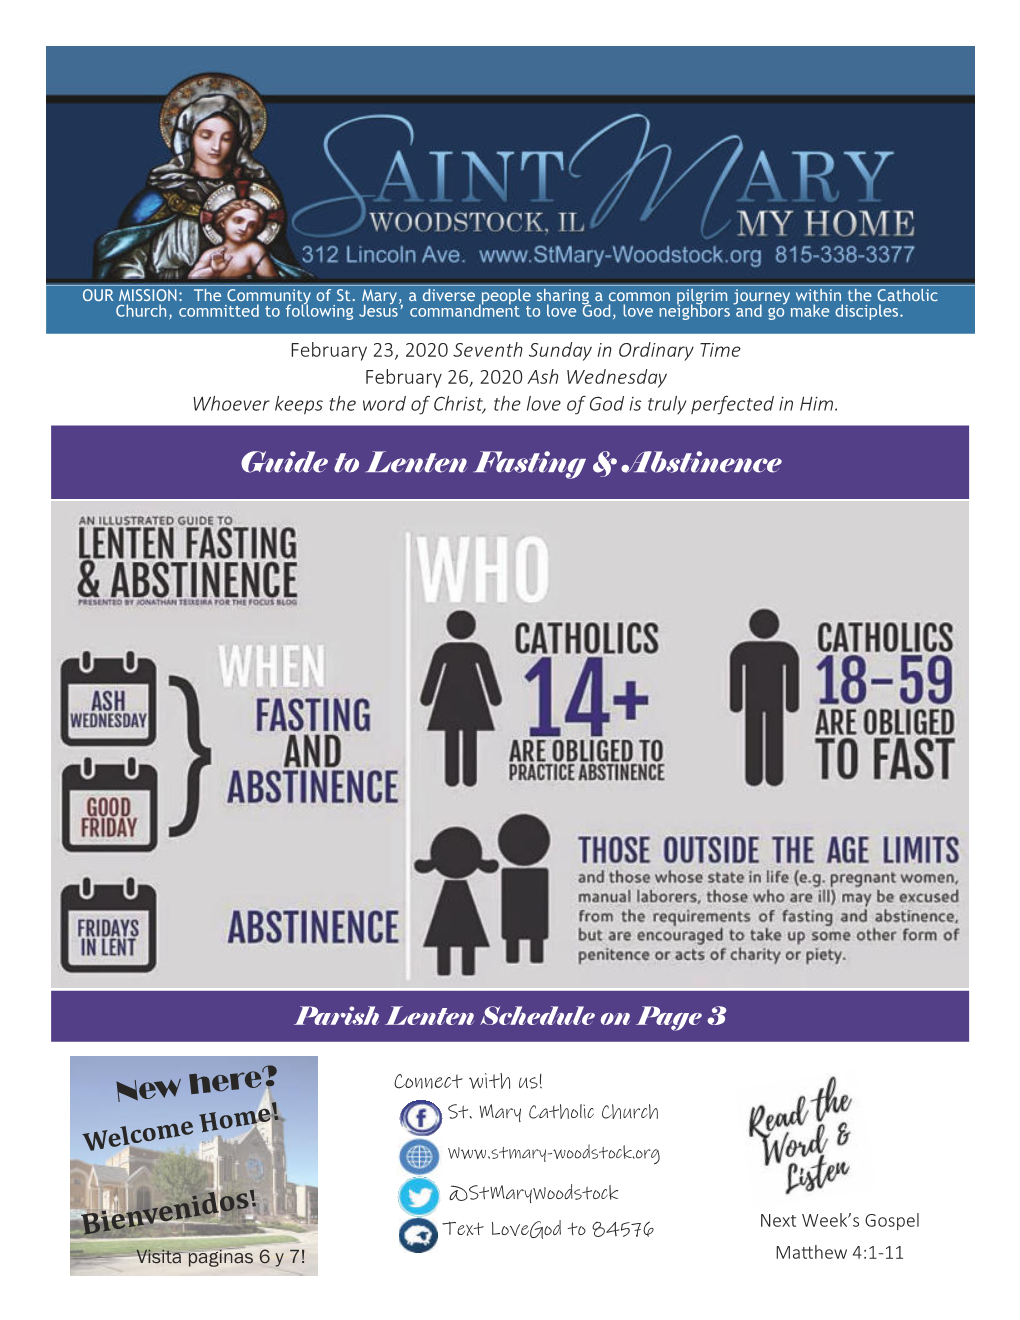 Guide to Lenten Fasting & Abstinence